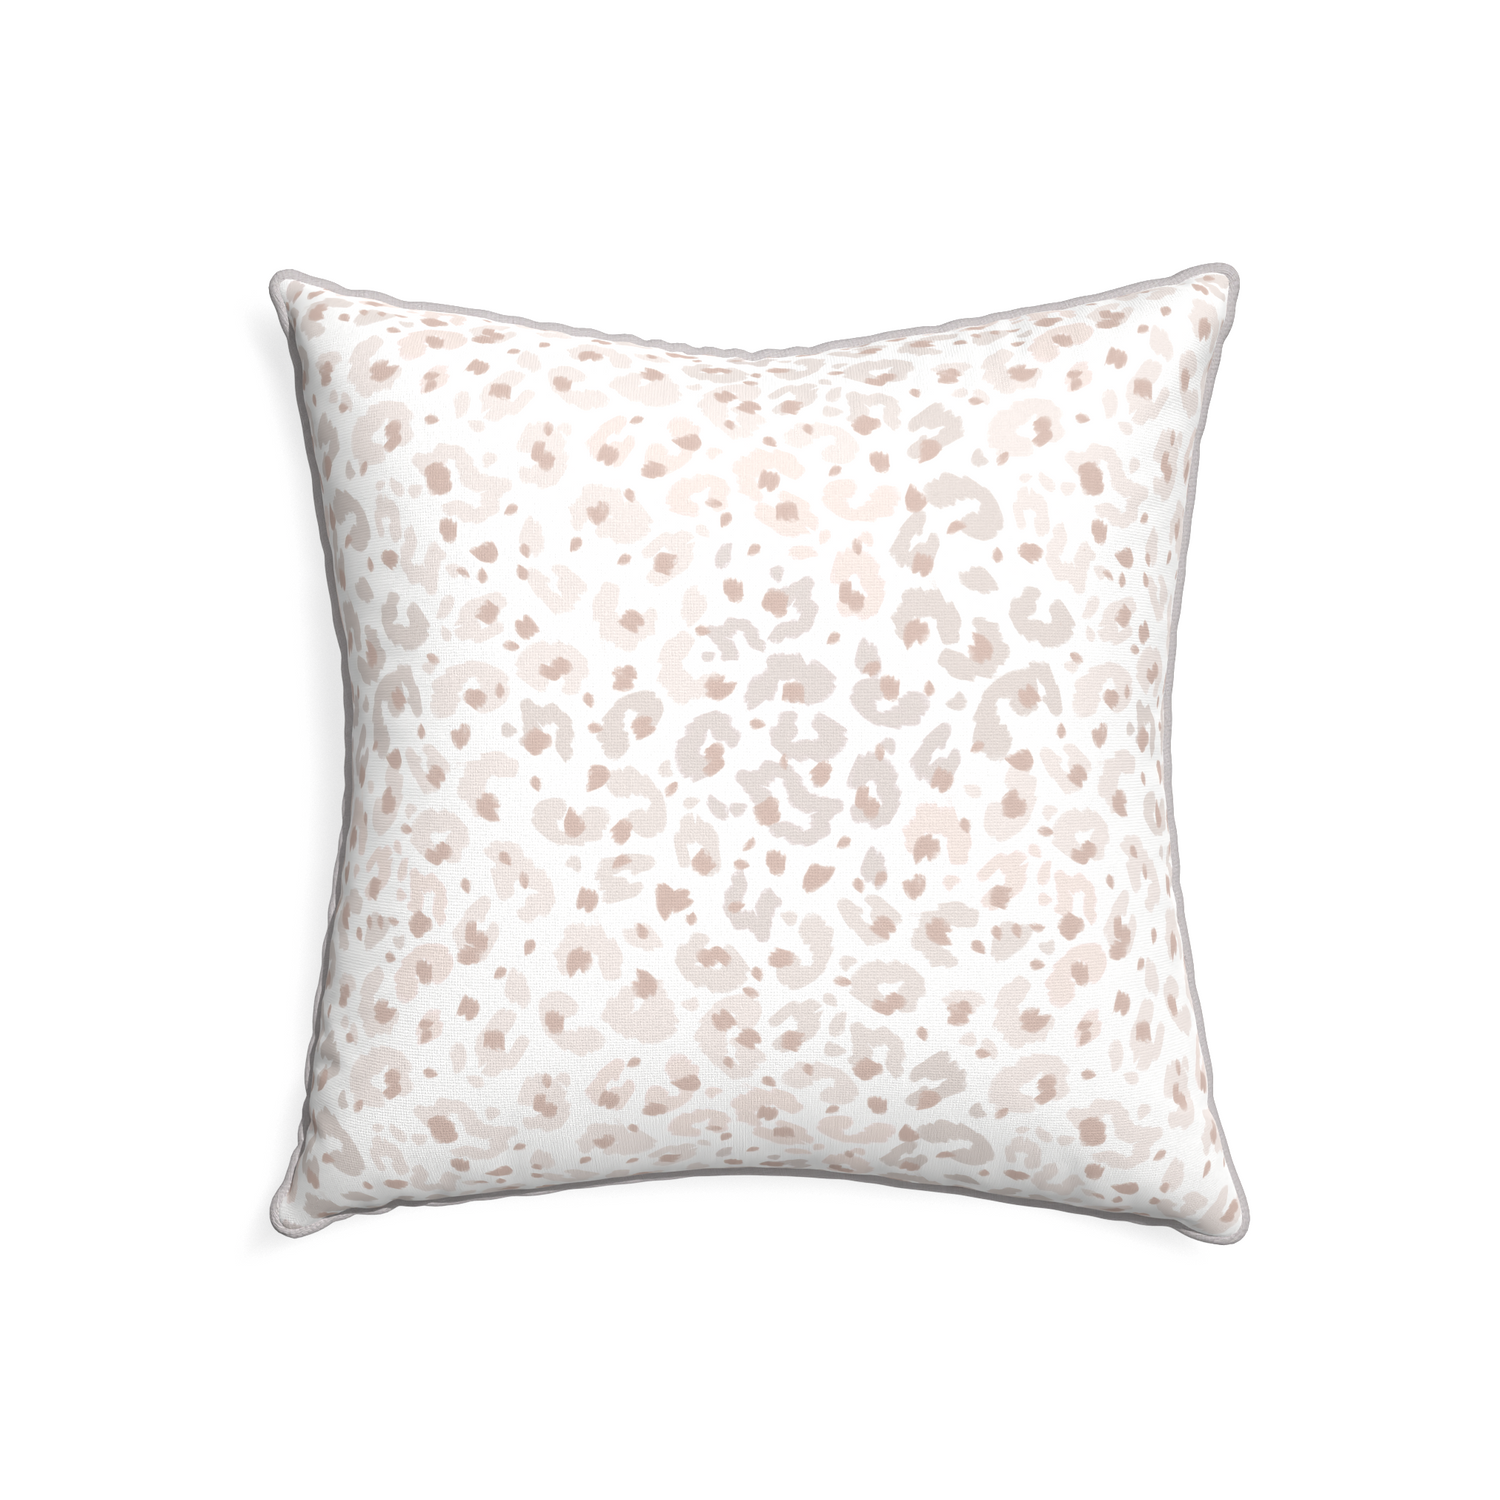 22-square rosie custom pillow with pebble piping on white background